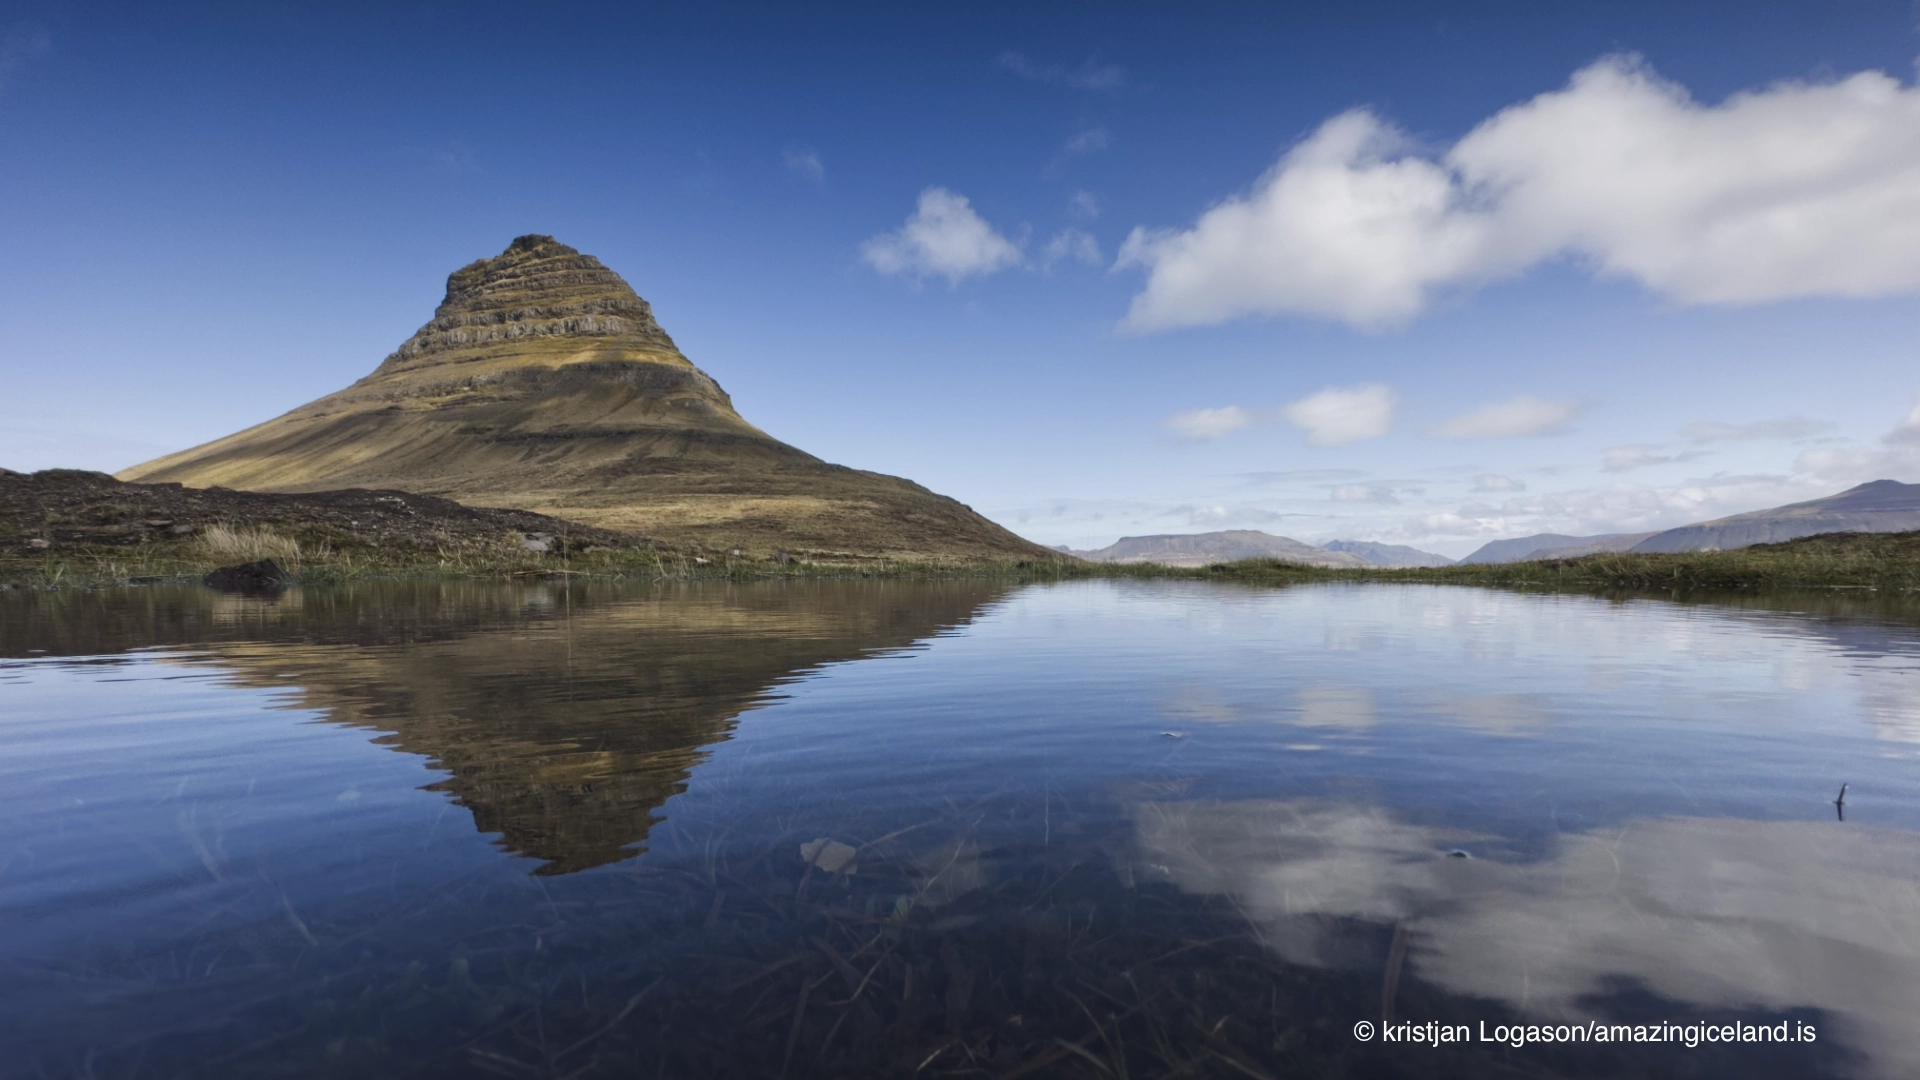 Mt Kirkjufell with a reflection in a pool